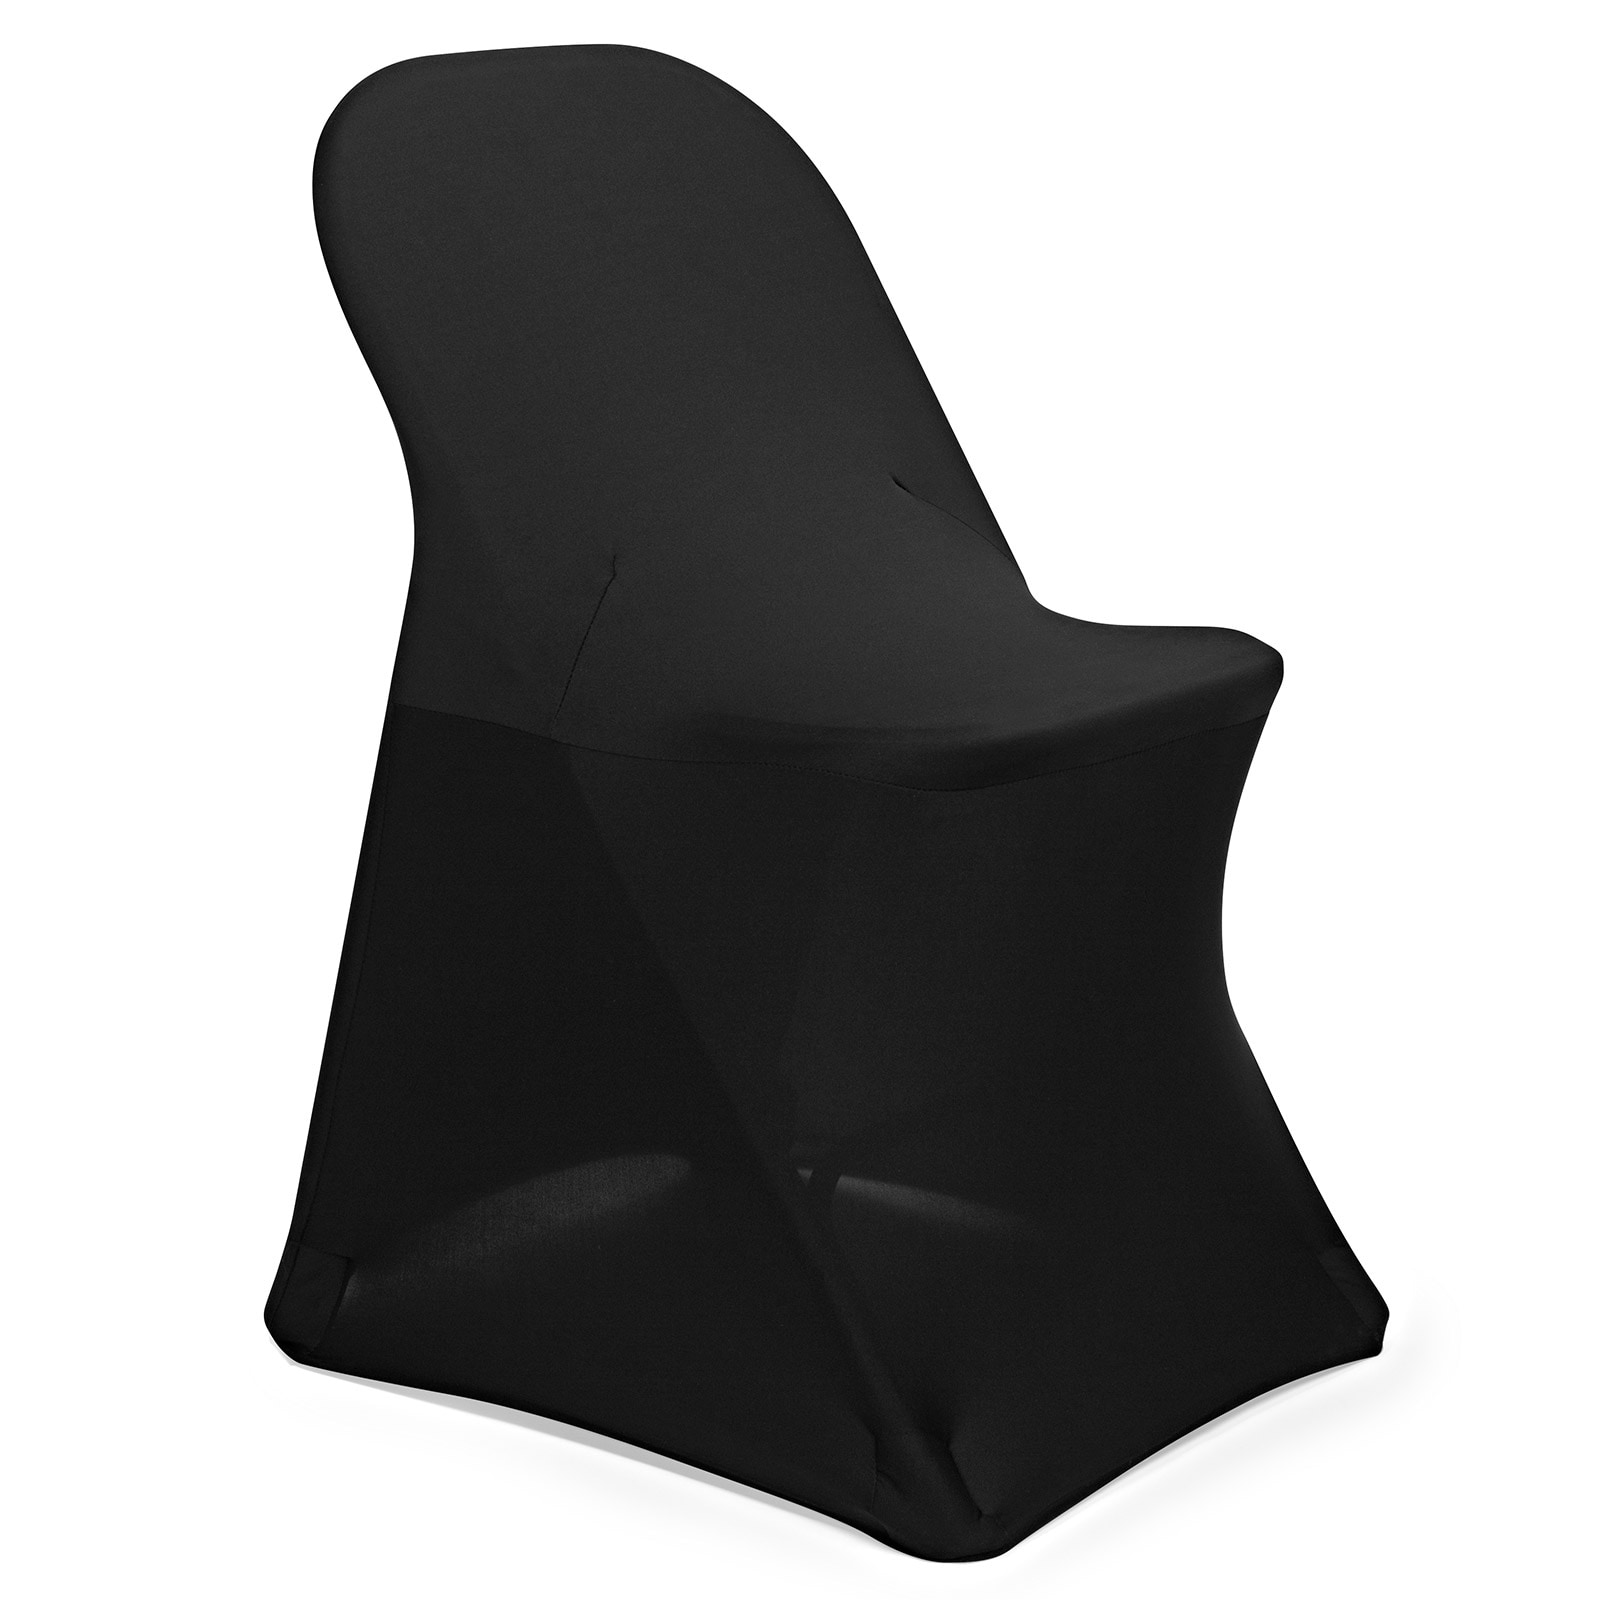 https://ak1.ostkcdn.com/images/products/is/images/direct/e08274d6044a8a9a51c63c0c1a88f97a44abaa74/50-Count-Spandex-Folding-Chair-Covers---Black.jpg